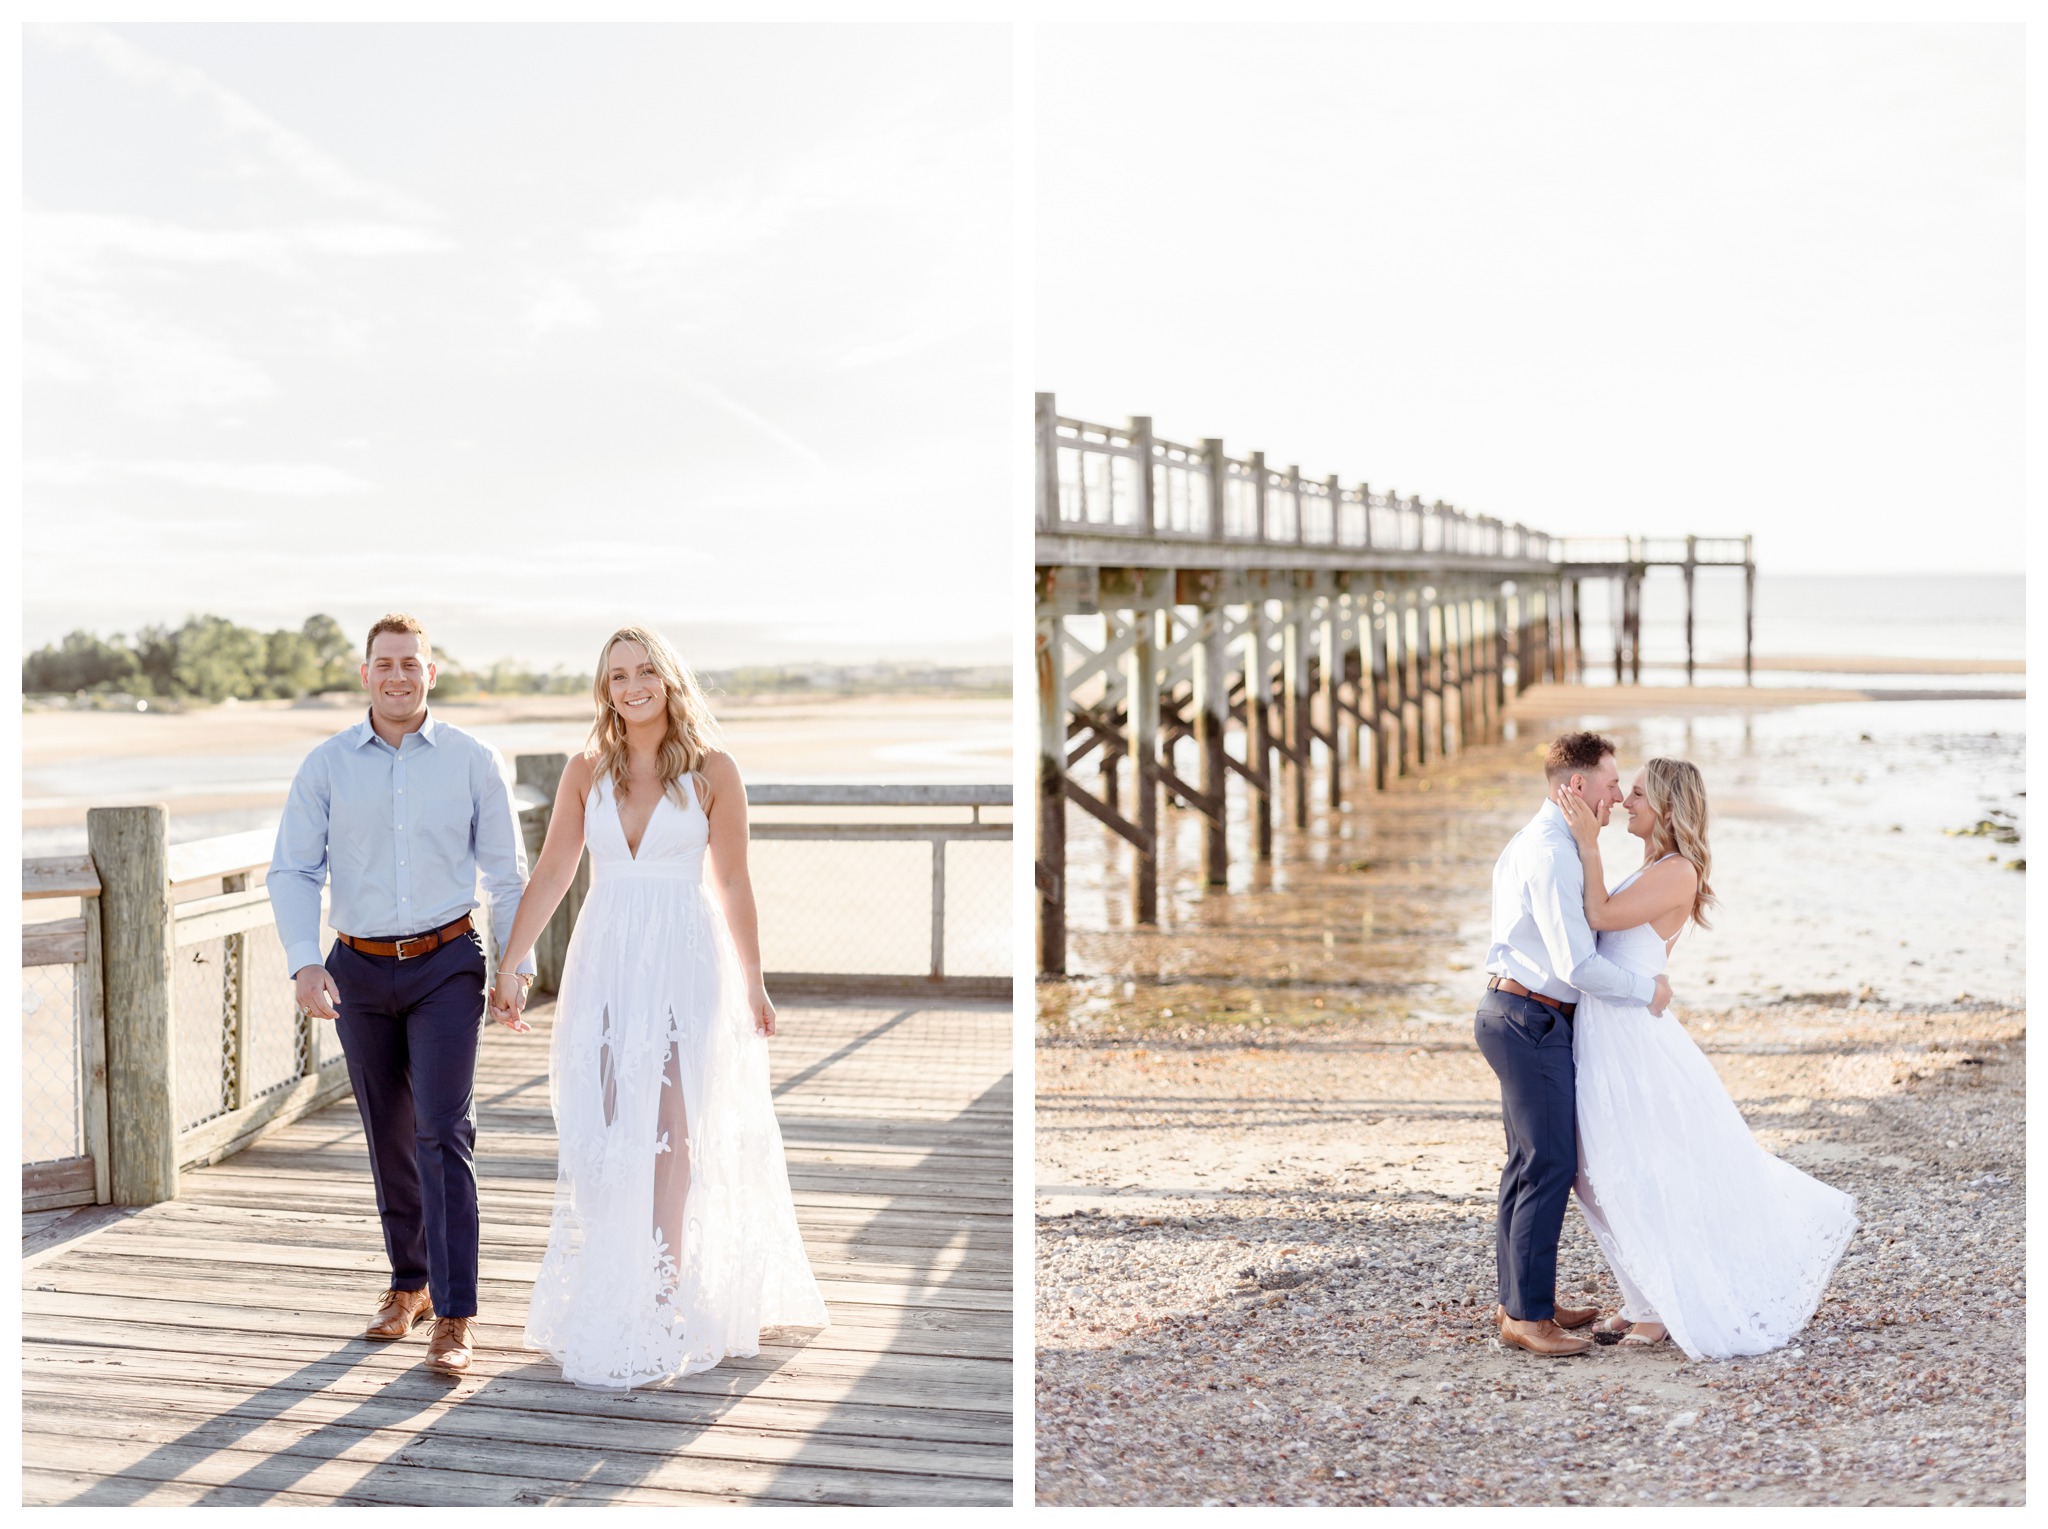 walnut beach engagement session in milford ct at silver sands beach with pier in background